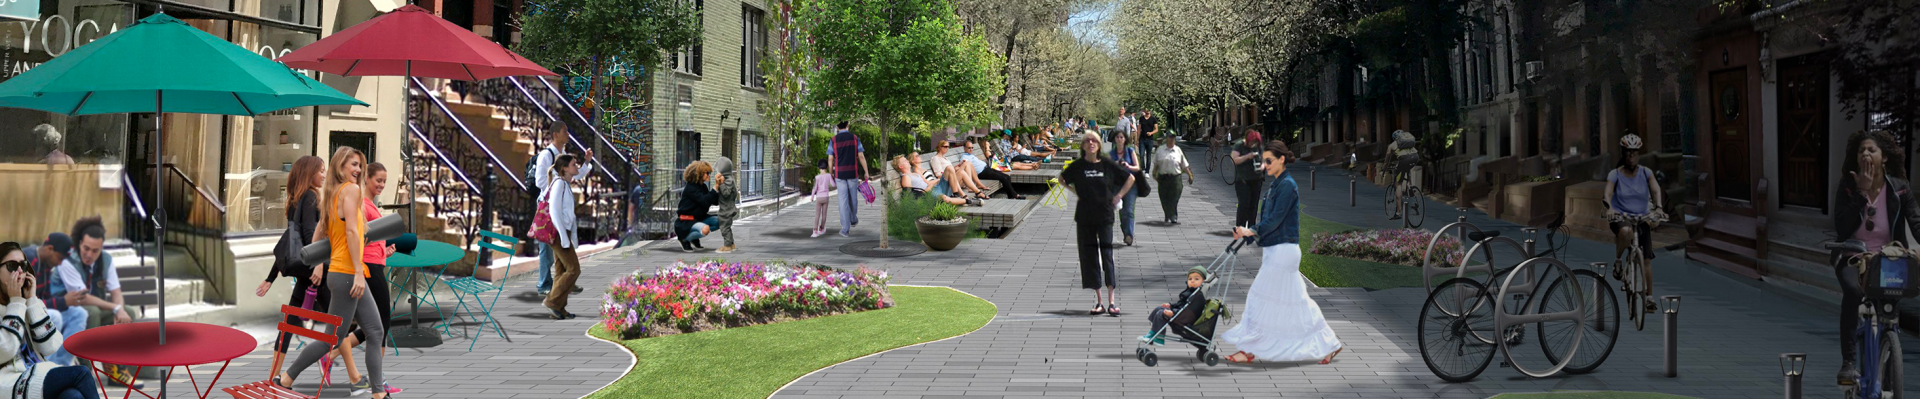 Street Plans Concludes 6-month Study for NYACK Bike & Ped Master Plan